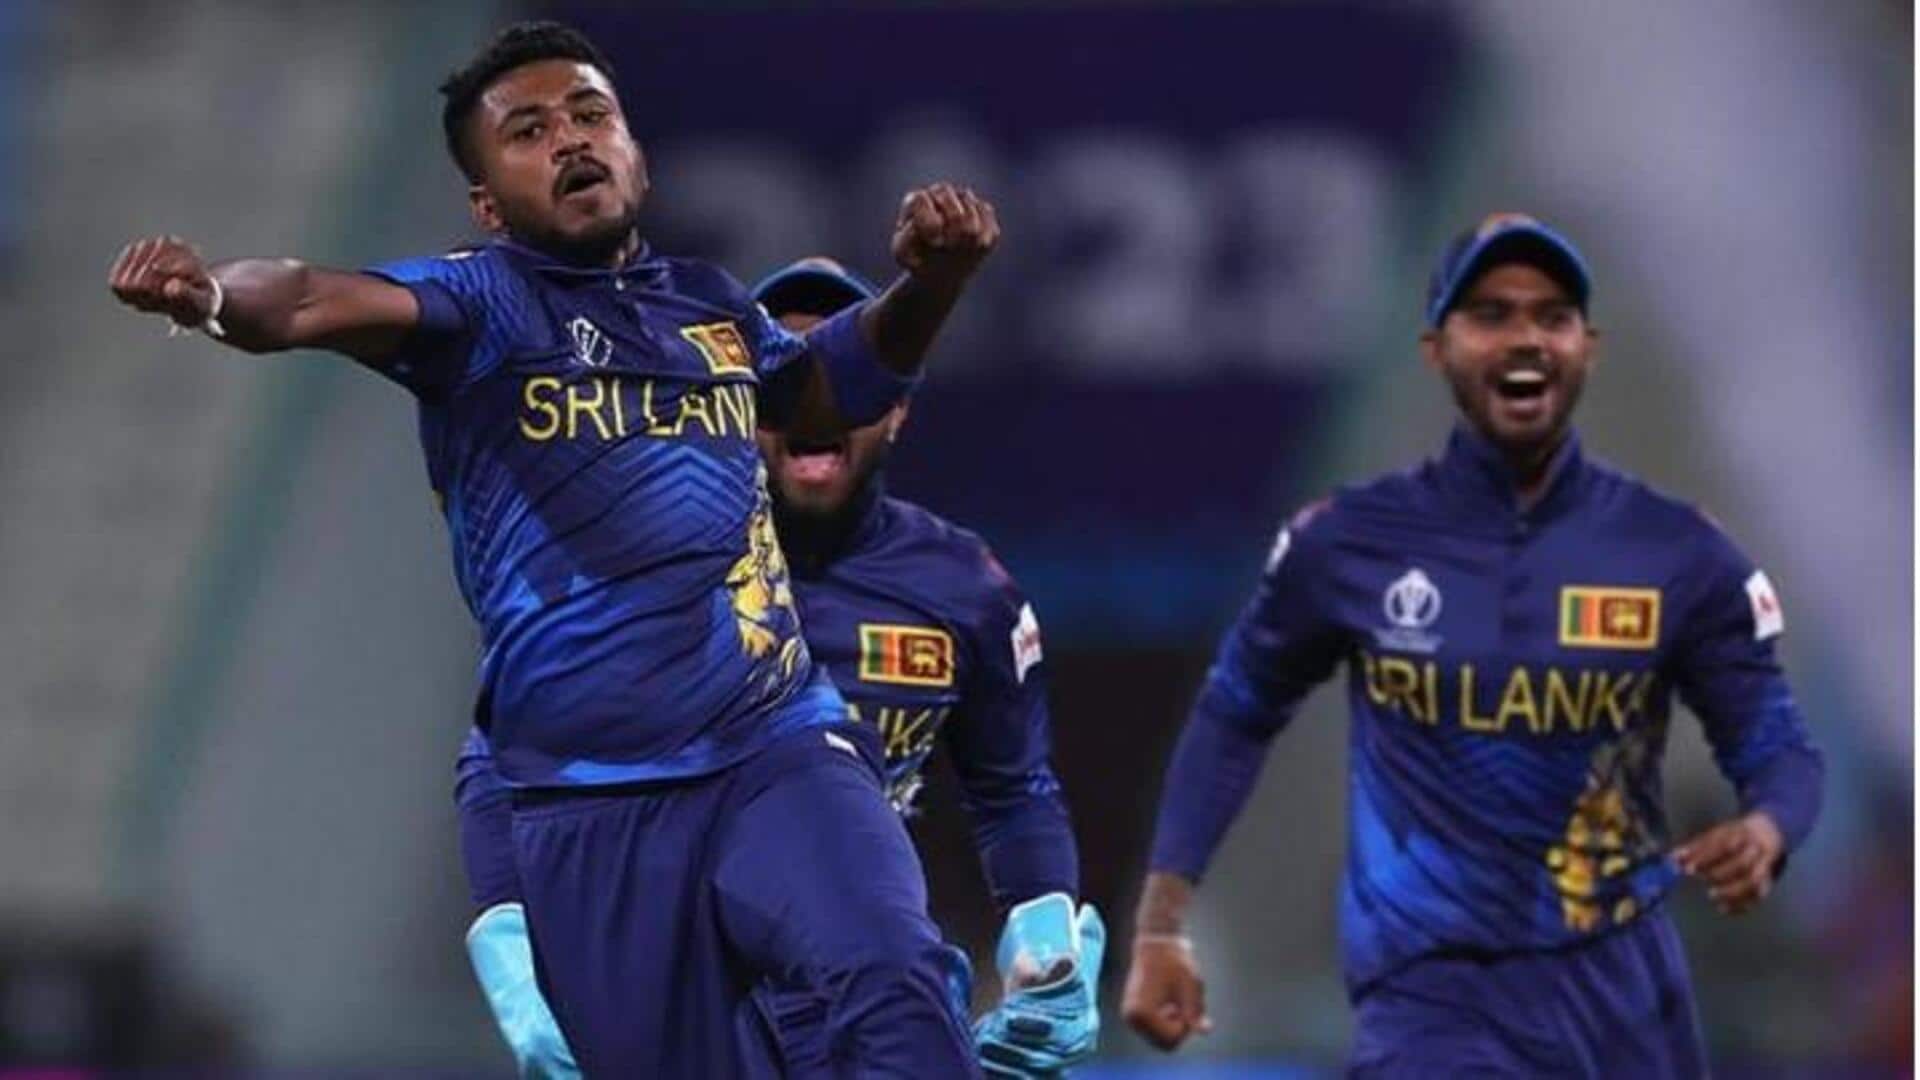 Dilshan Madushanka scripts history with World Cup fifer against India